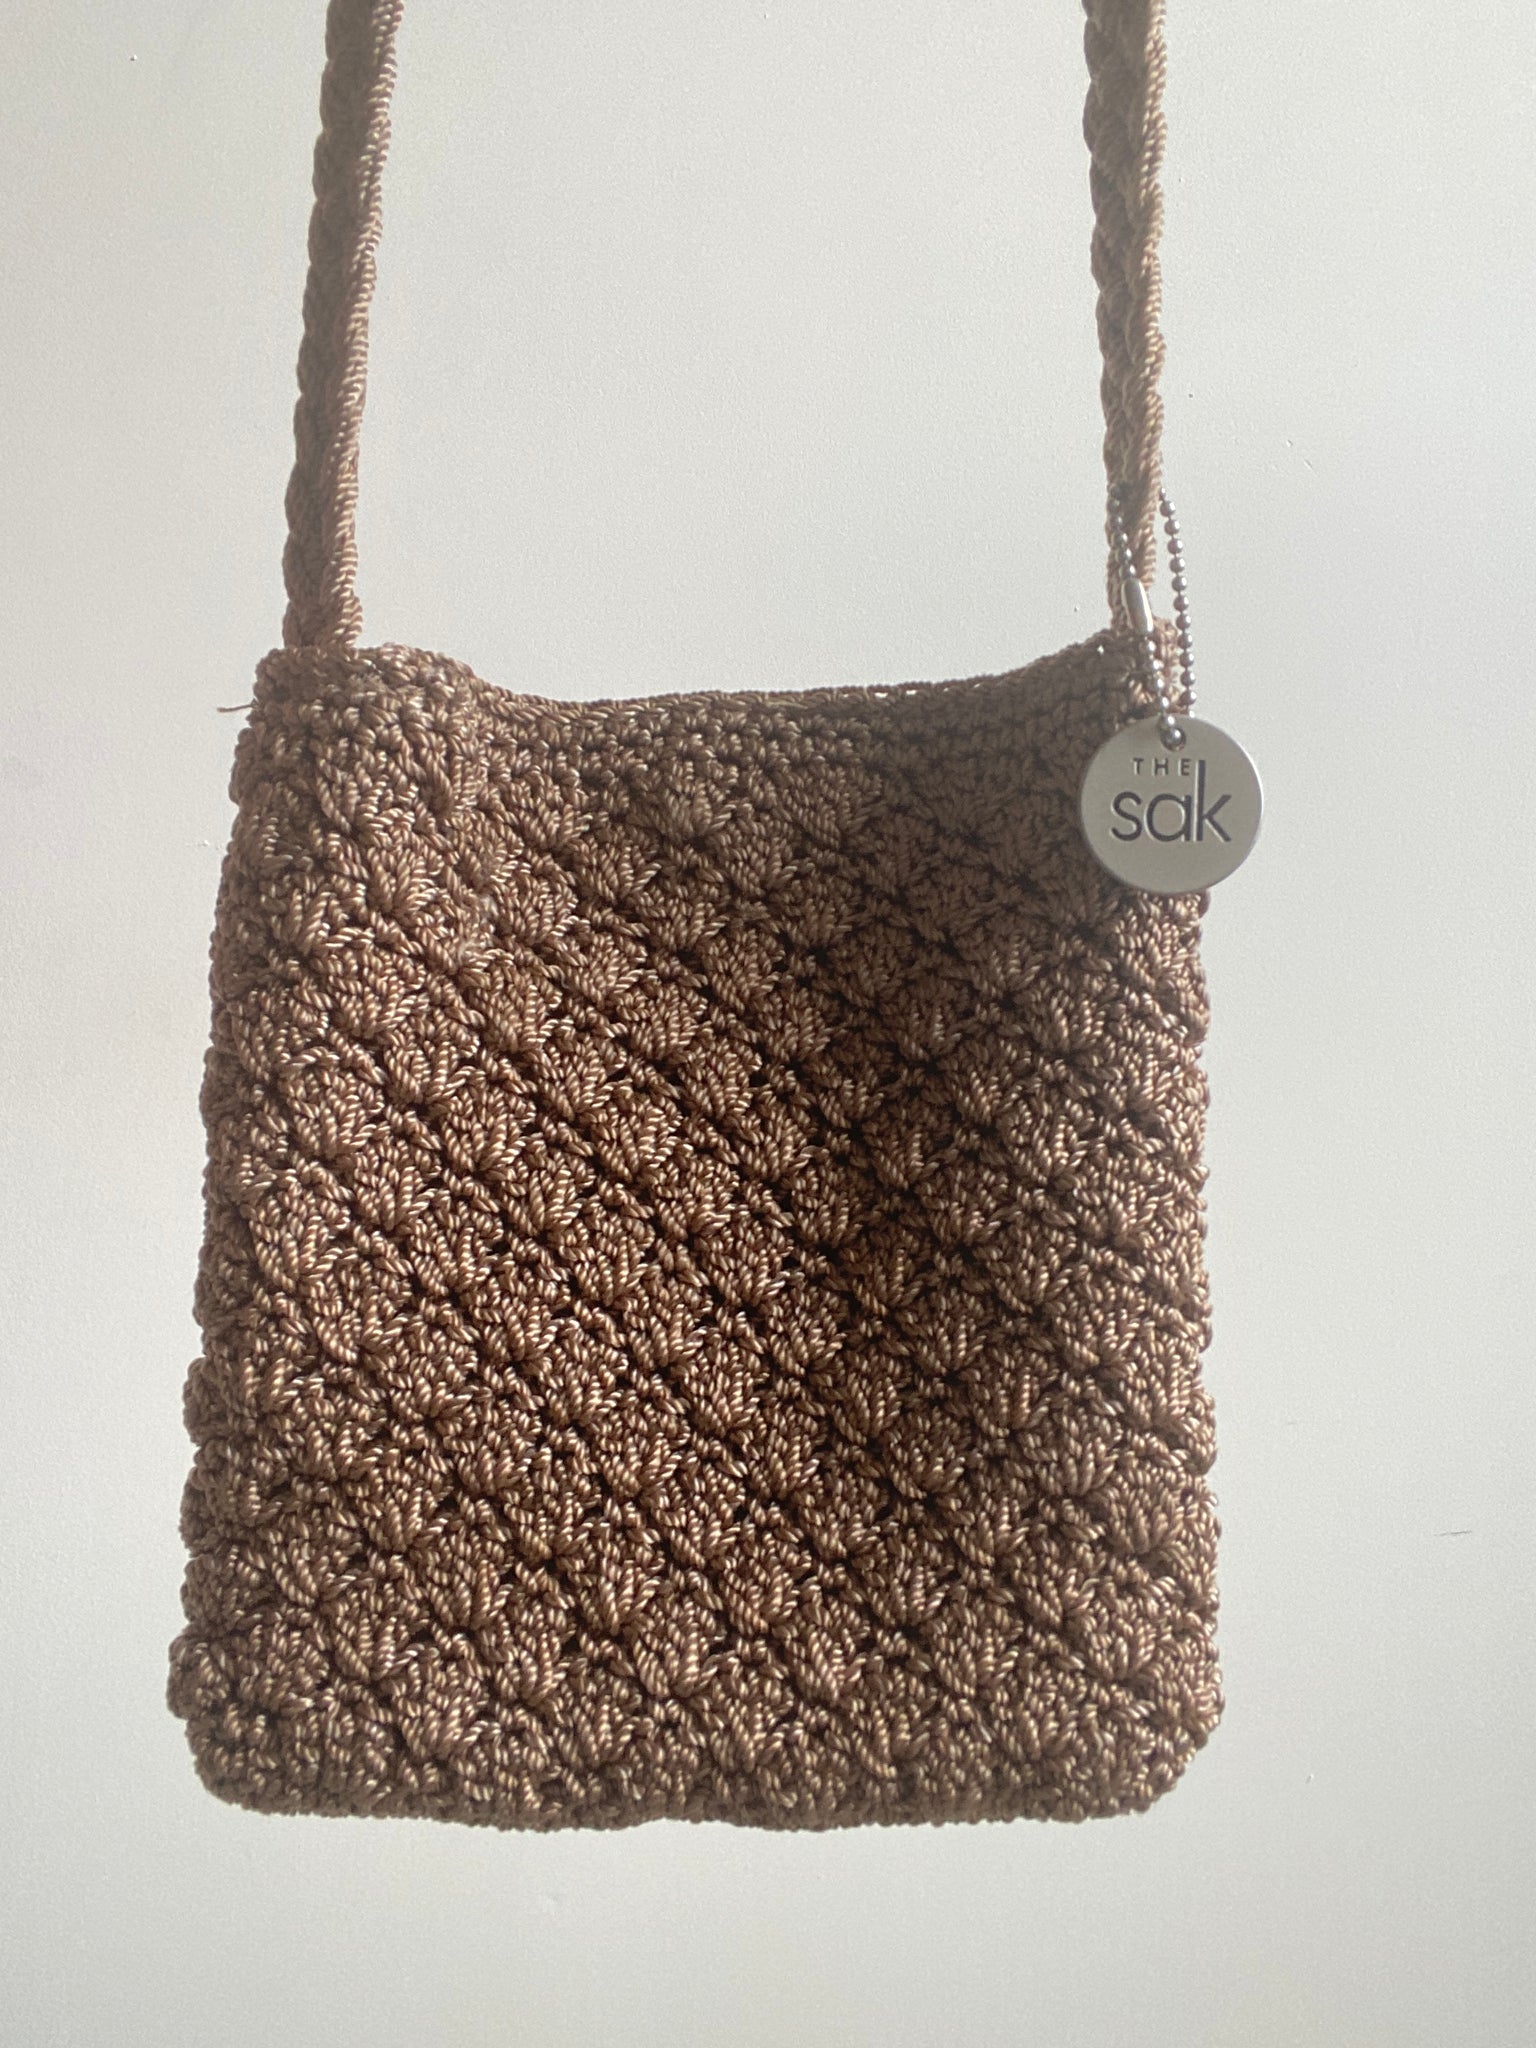 Small Crocheted Bag by The Sak